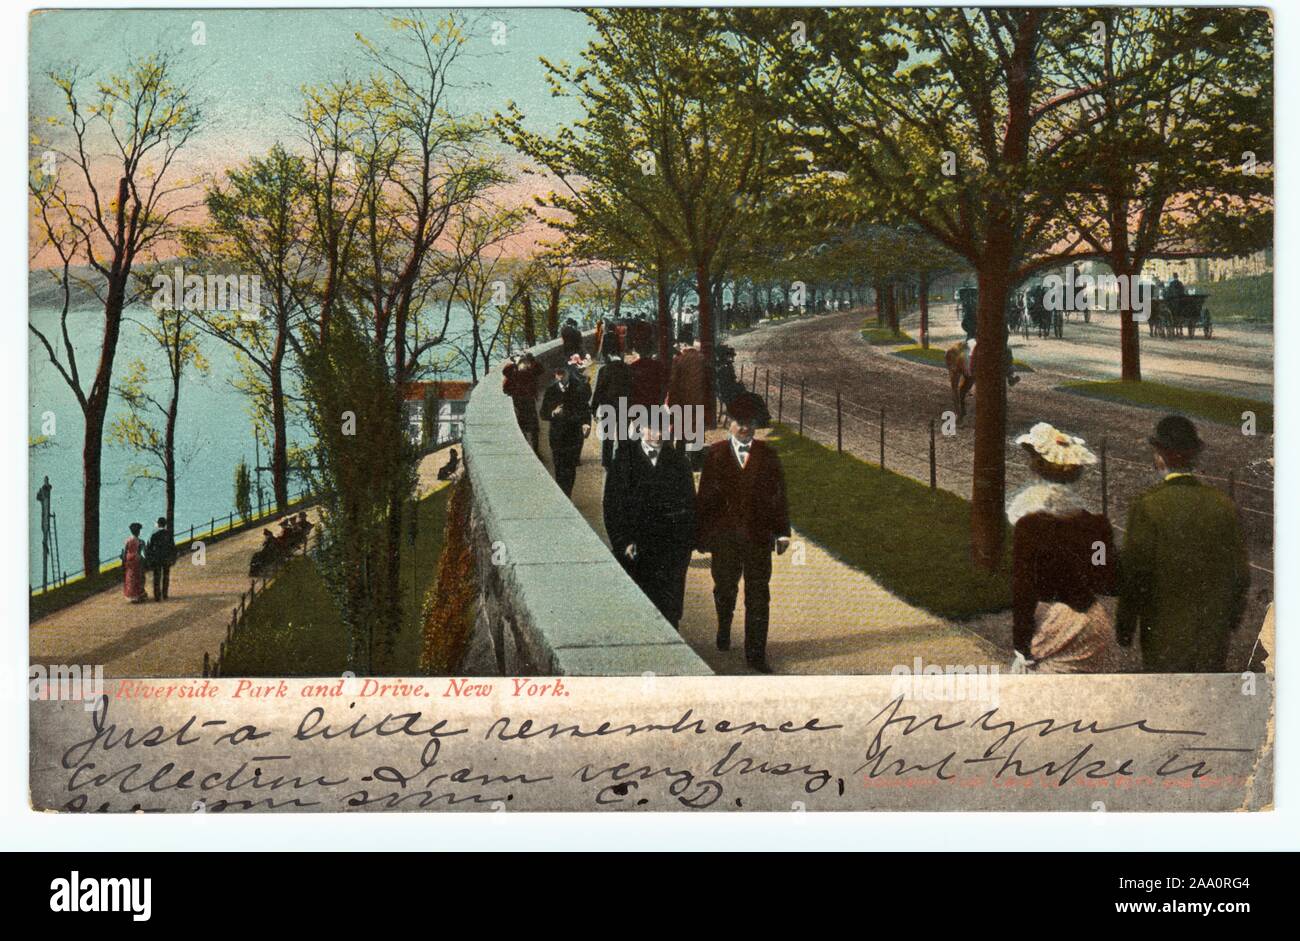 Illustrated postcard of people walking, Riverside Park and Drive, New York City, published by Souvenir Post Card Co, 1905. New York and Berlin. From the New York Public Library. () Stock Photo